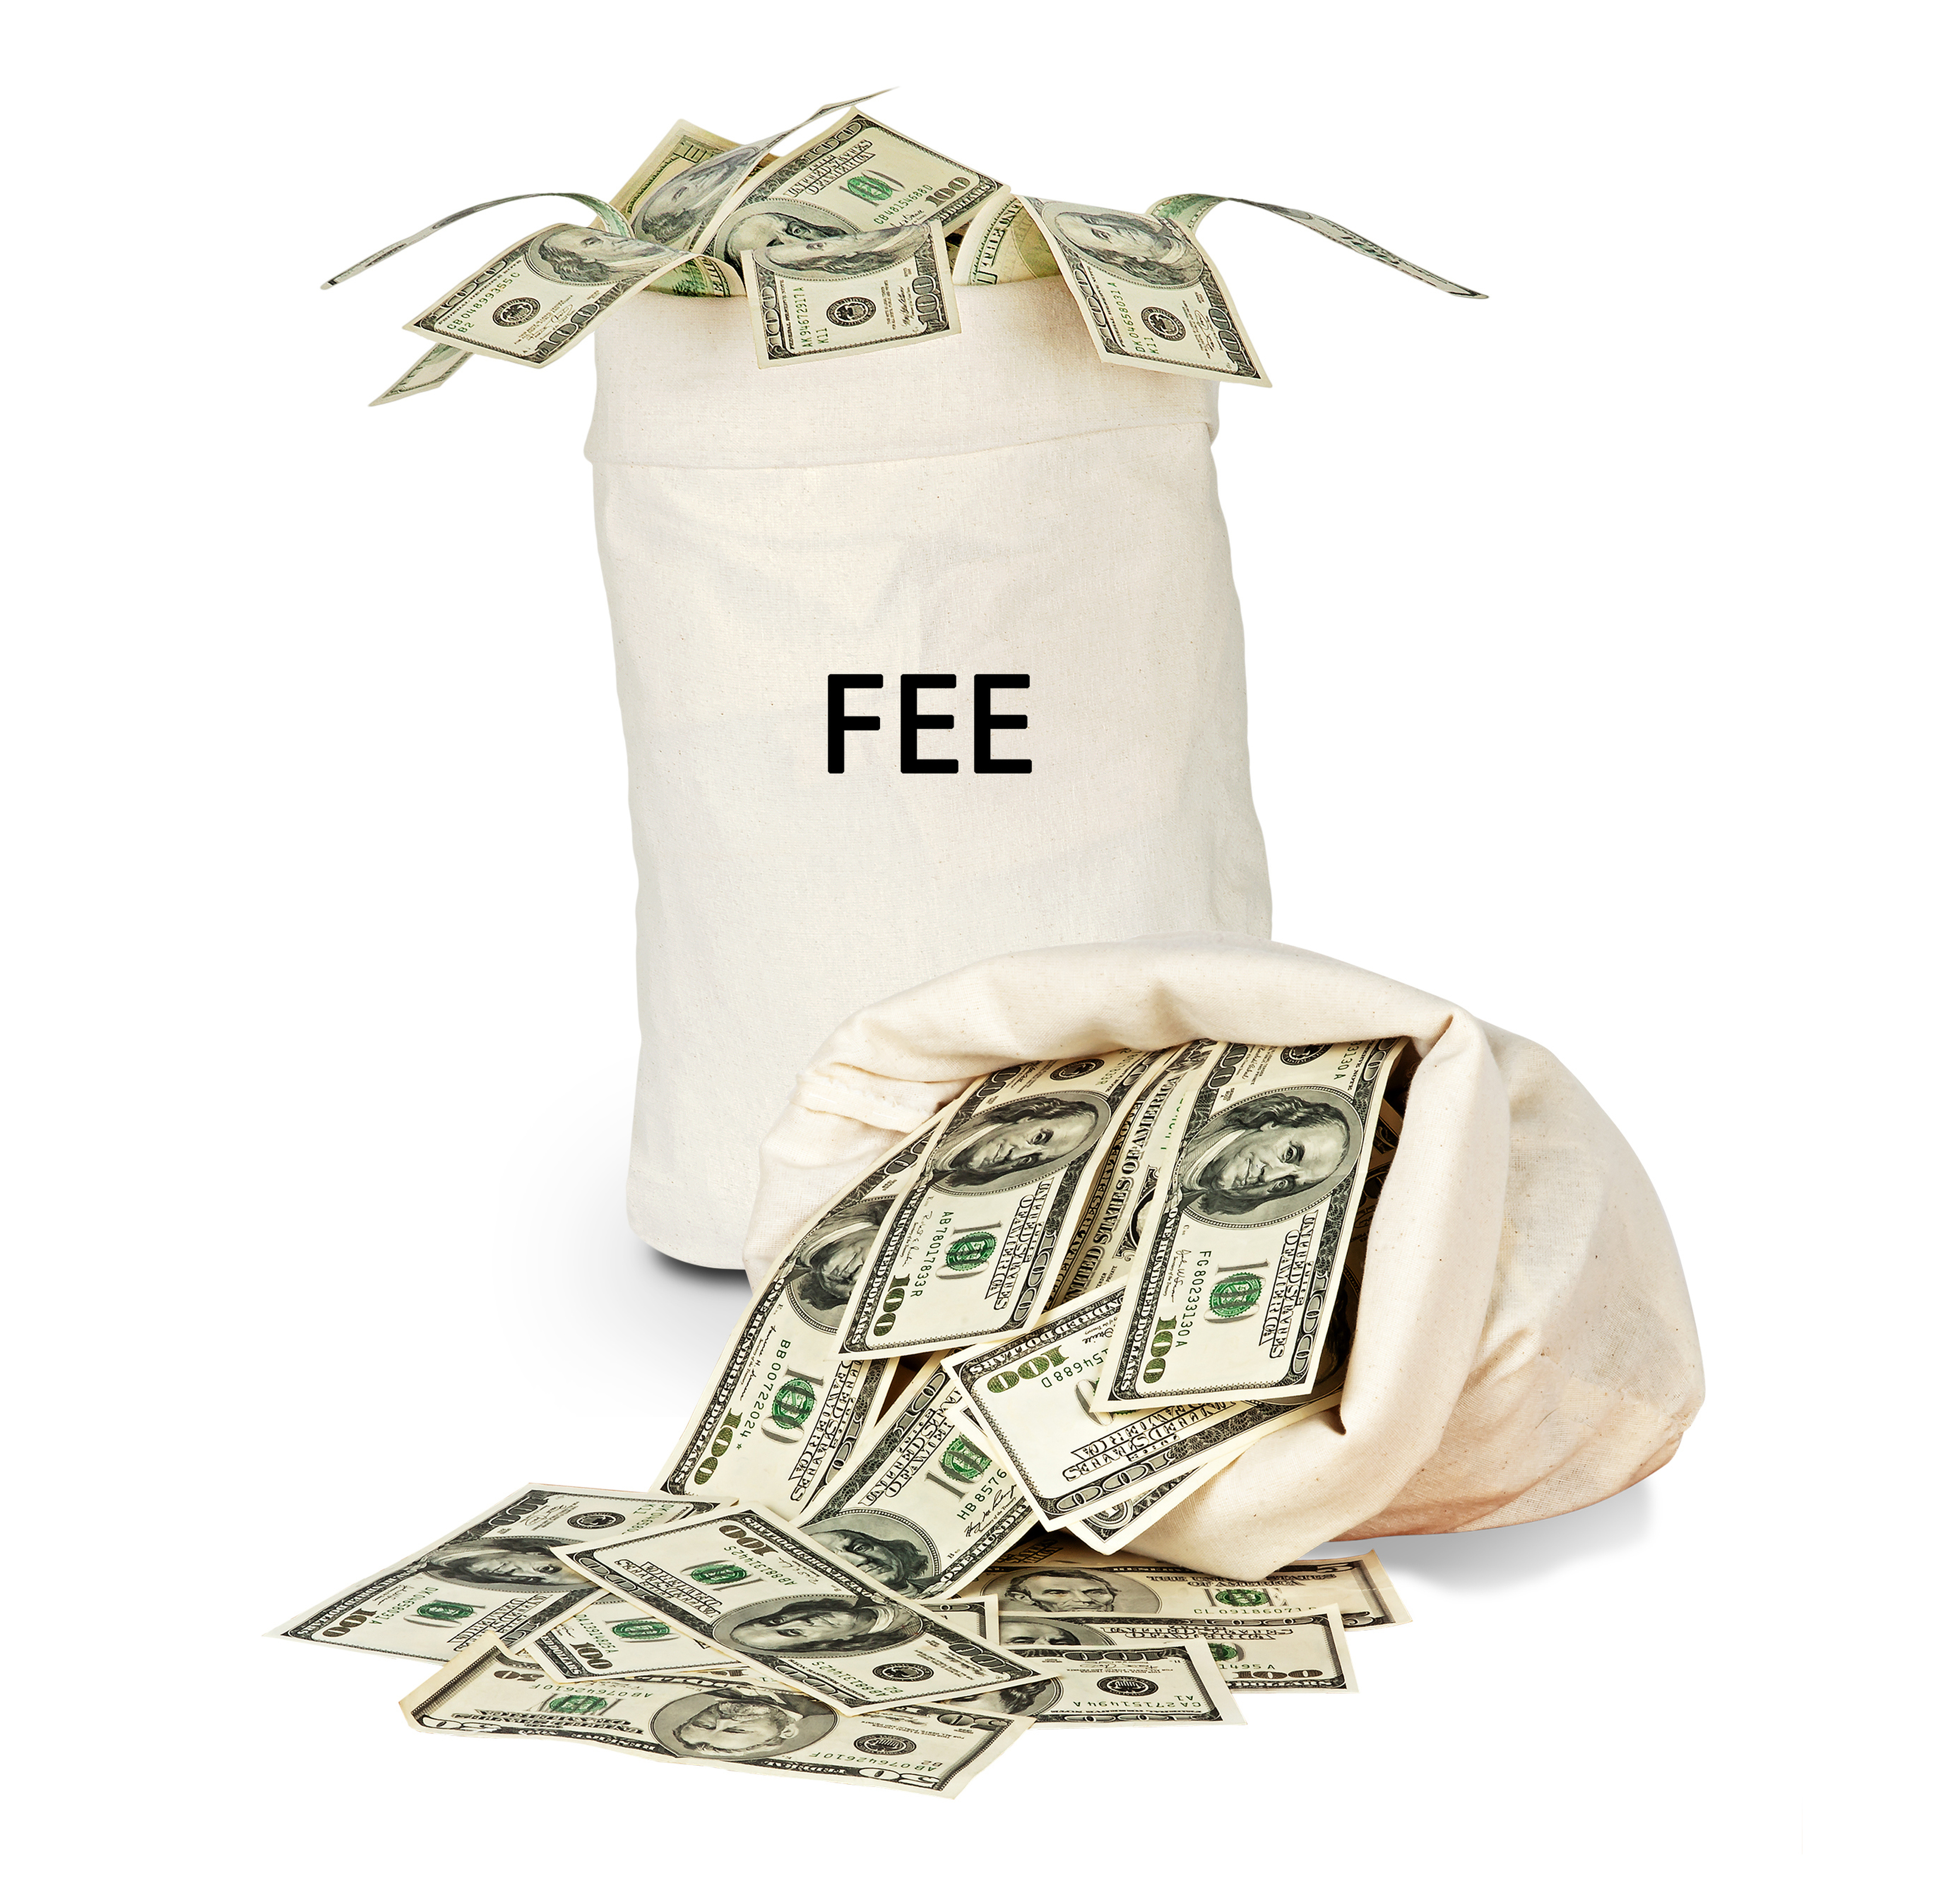 Illinois_Condo_Association_charing_too_many_assessment_fees_021215